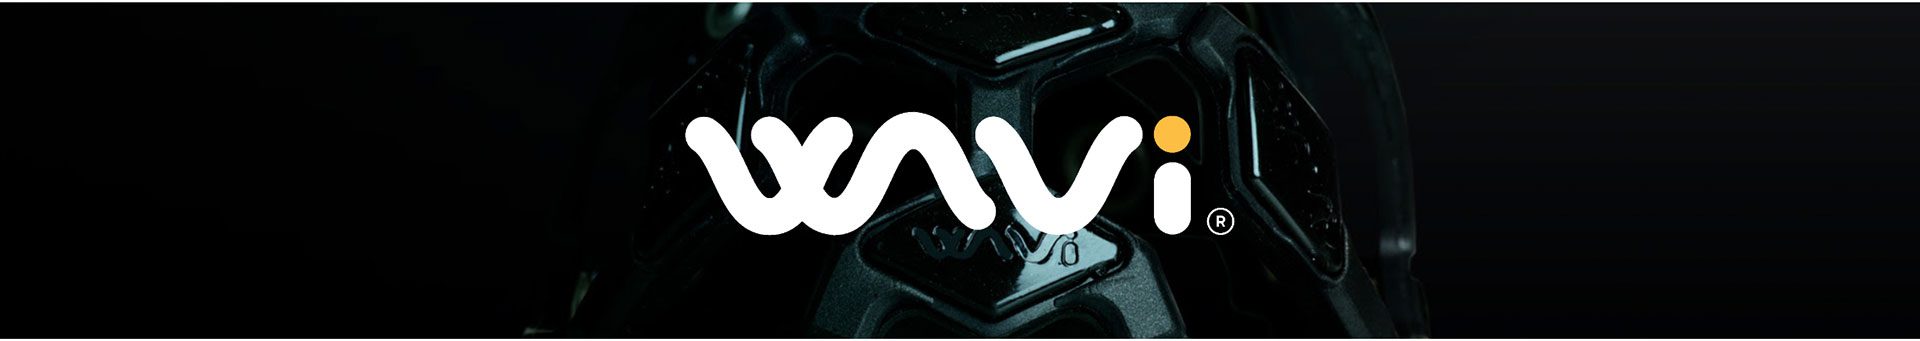 A close up of the waves logo on a black background